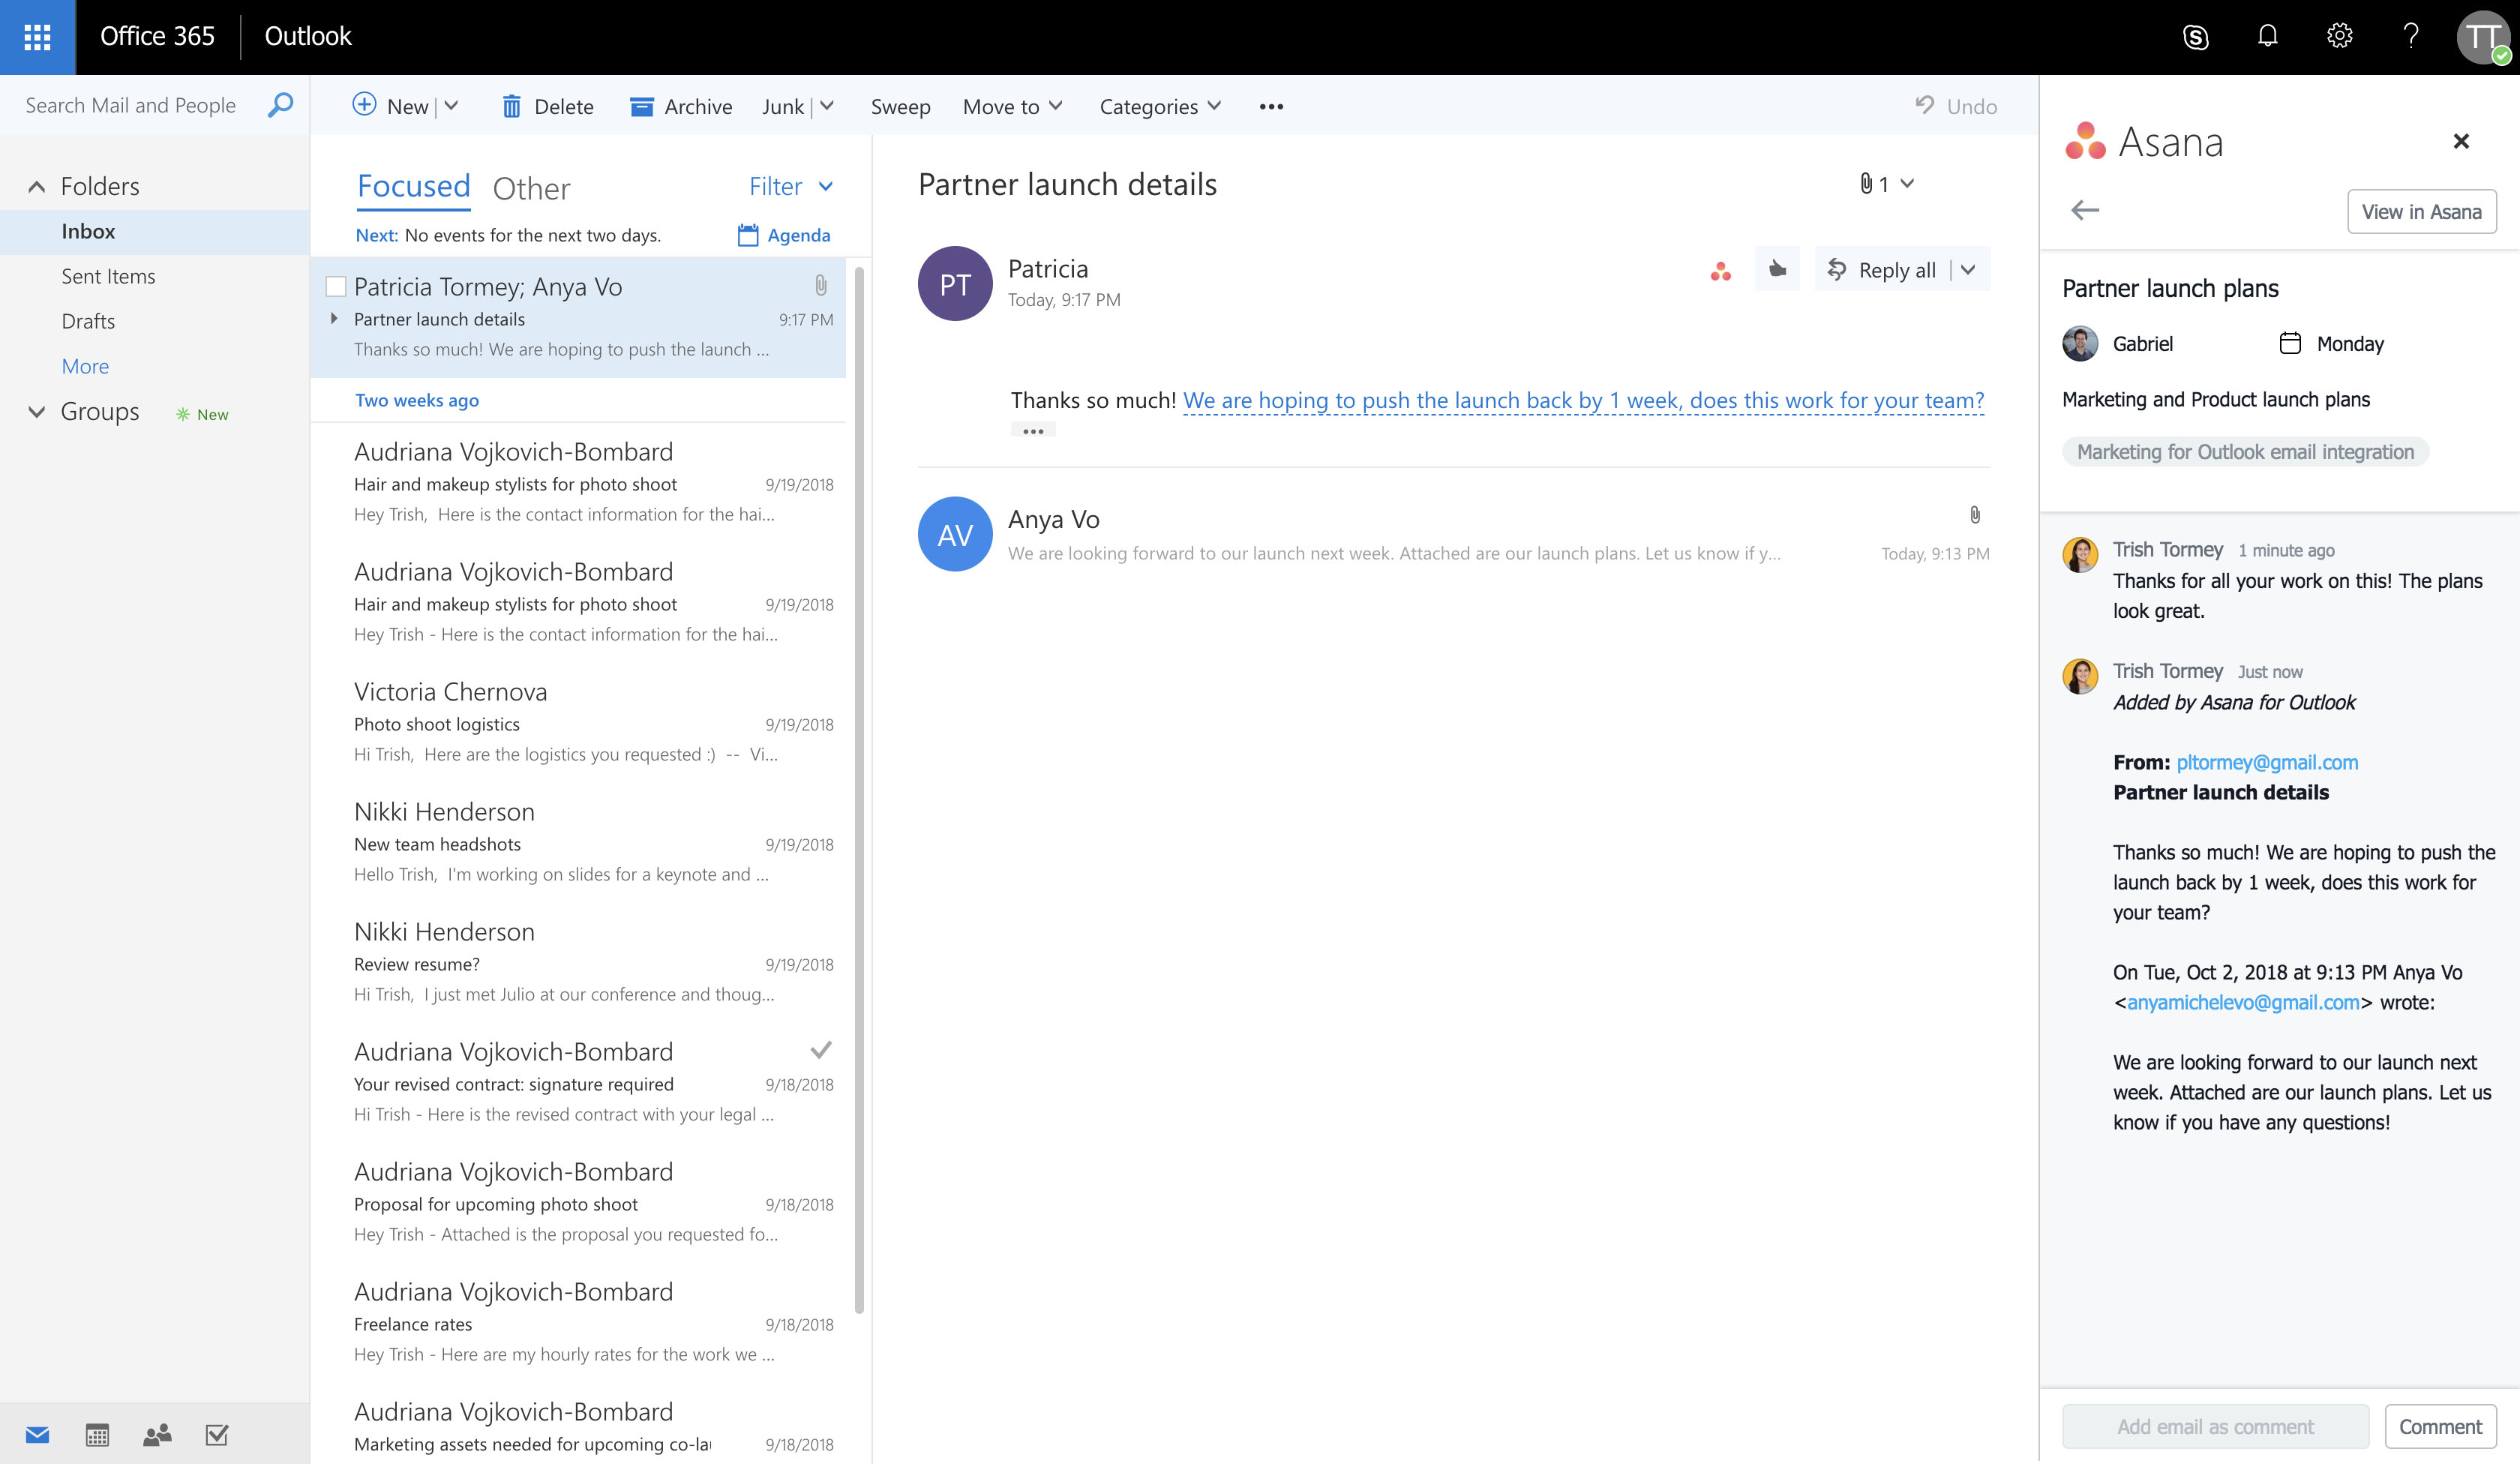 Ways to use the new Asana Outlook integration